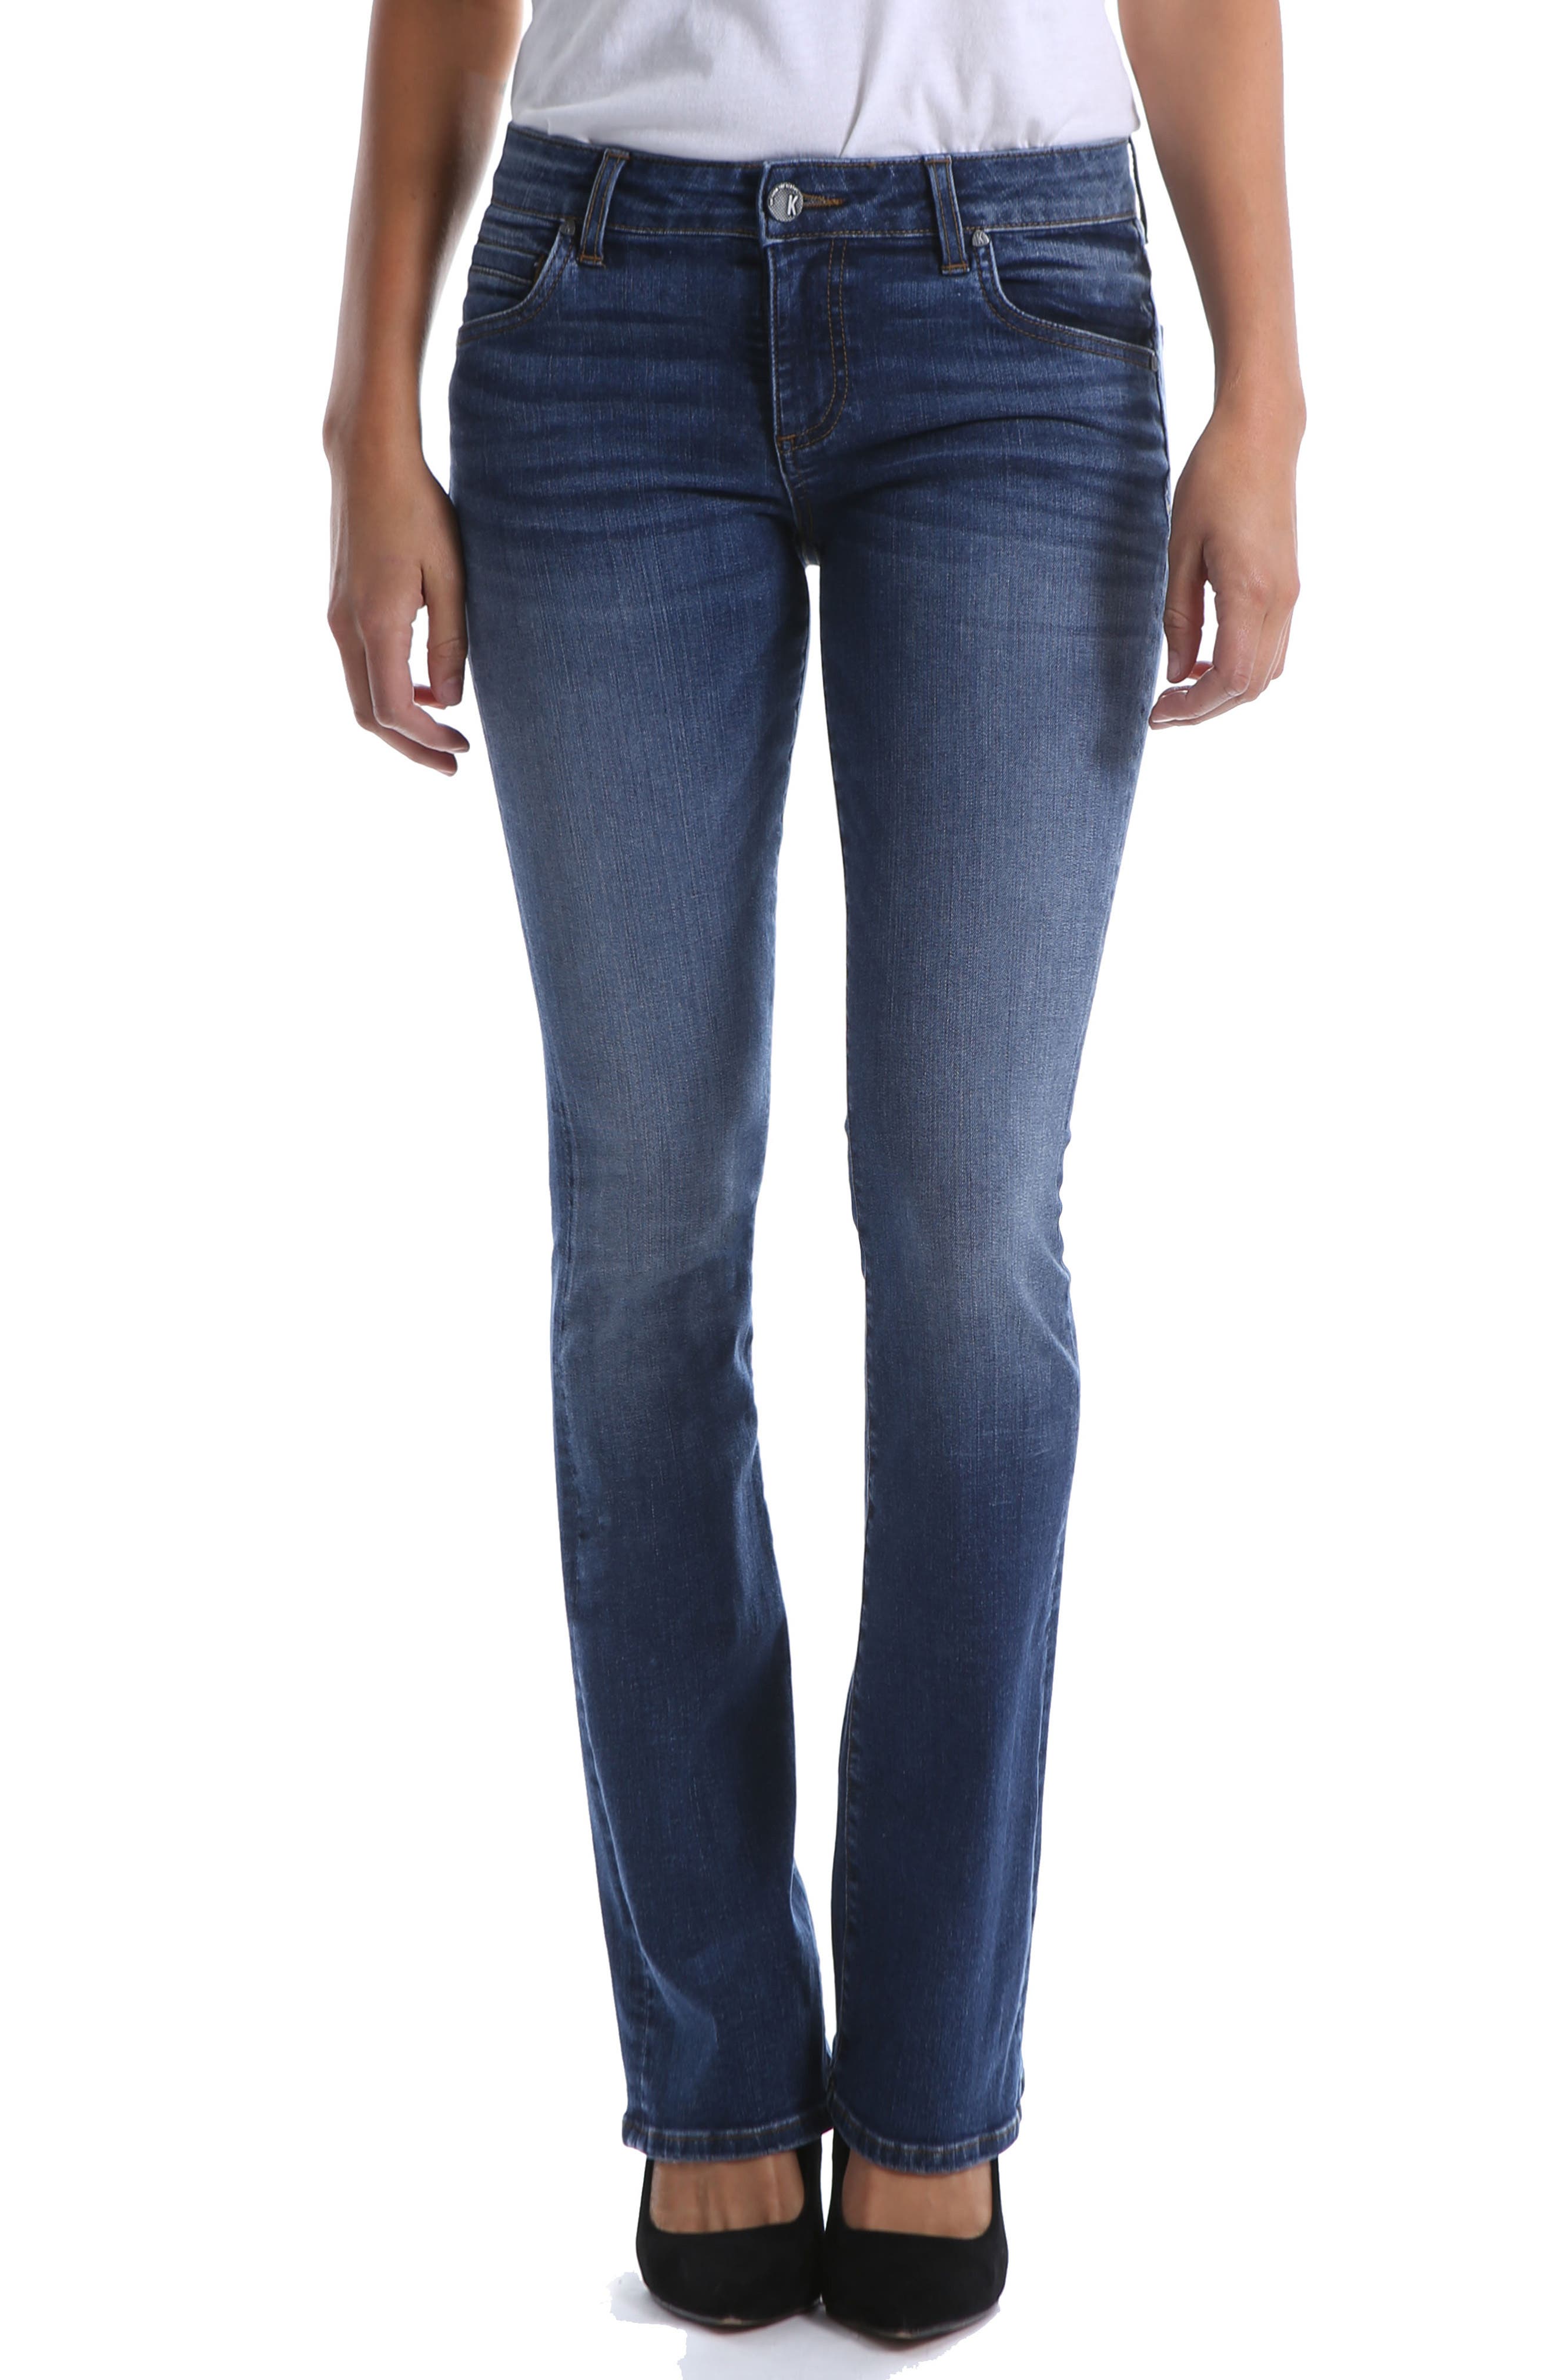 Petite Women's Kut From The Kloth Natalie Flare Jeans